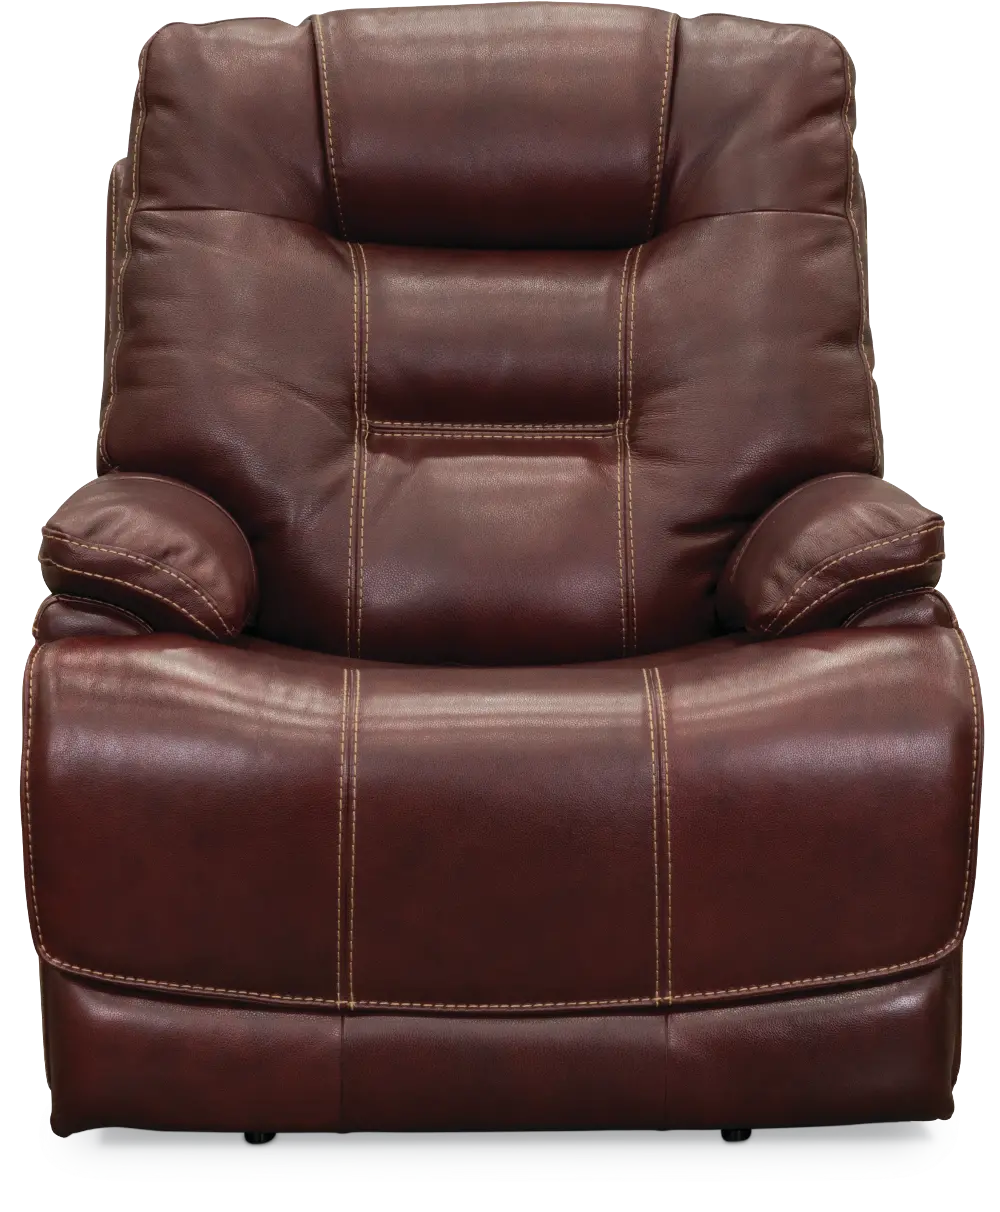 Ruby Red Leather-Match Lay-Flat Power Recliner - Bonanza-1